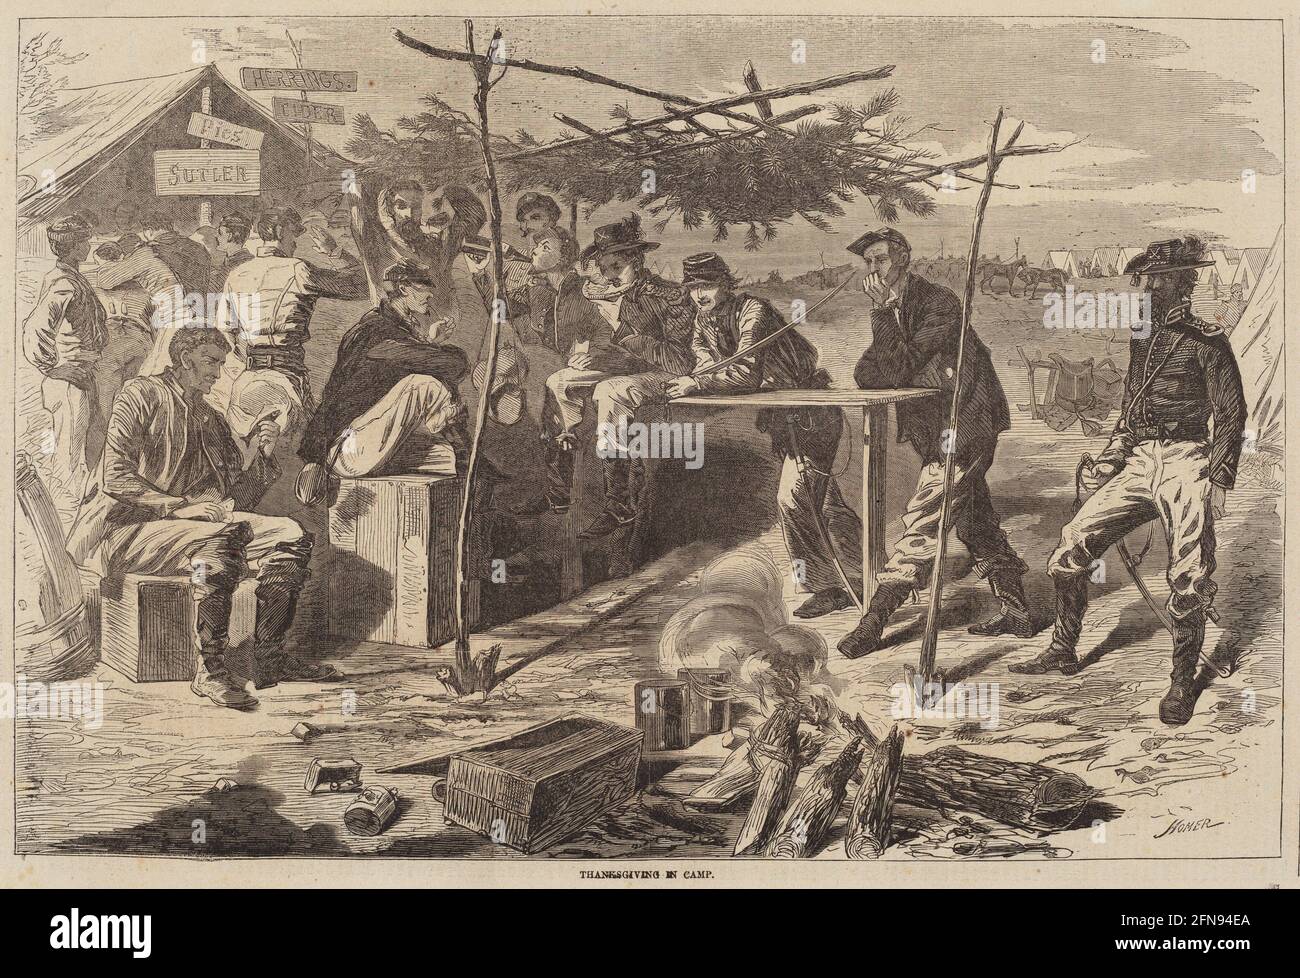 Thanksgiving in Camp, published 1862. Stock Photo